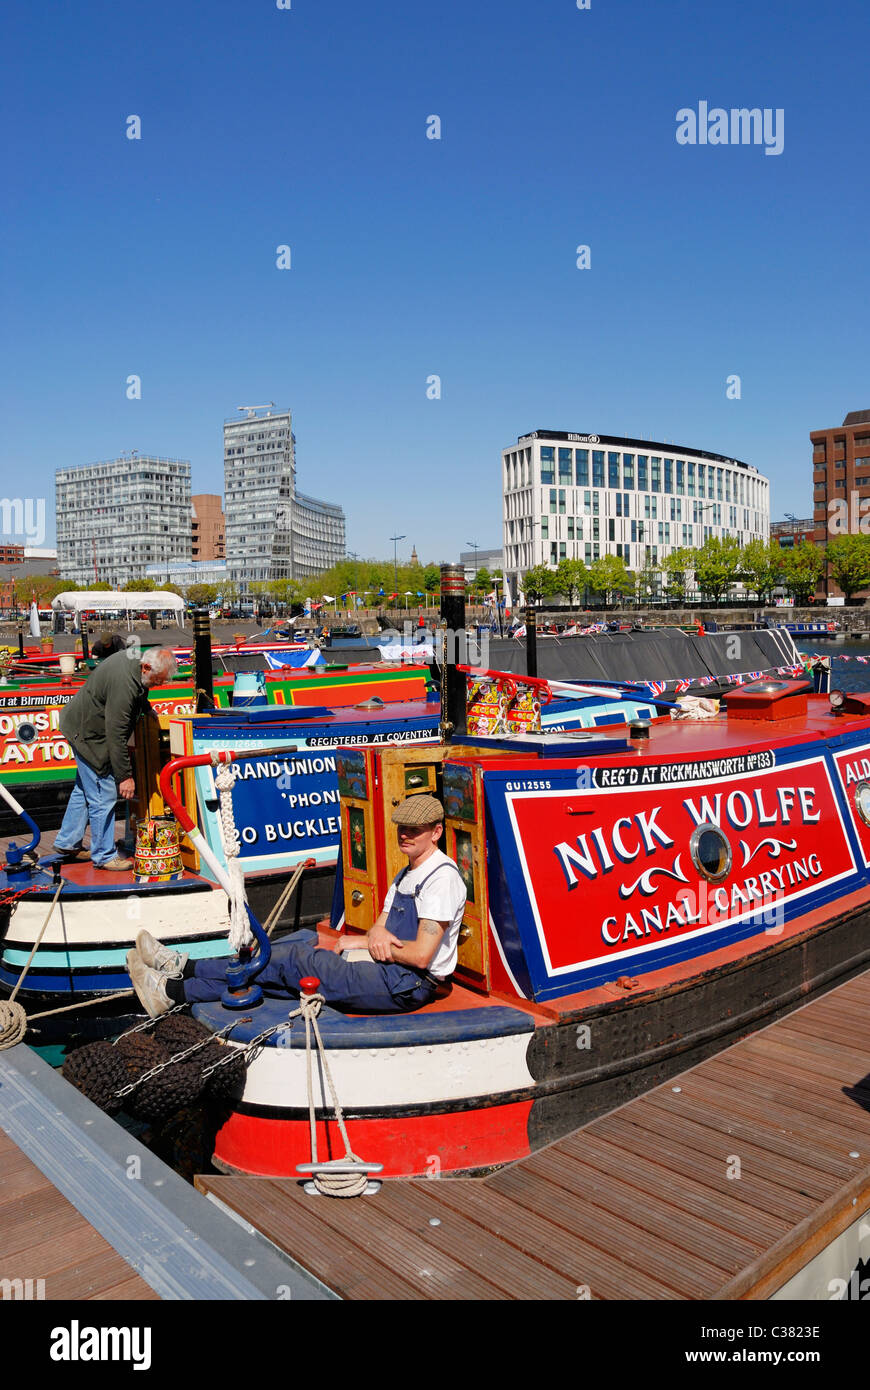 Narrowboats moored in Salthouse Dock ( Albert Dock tourist area ) in Liverpool Docks for the Spring on the Waterfront festival. Stock Photo